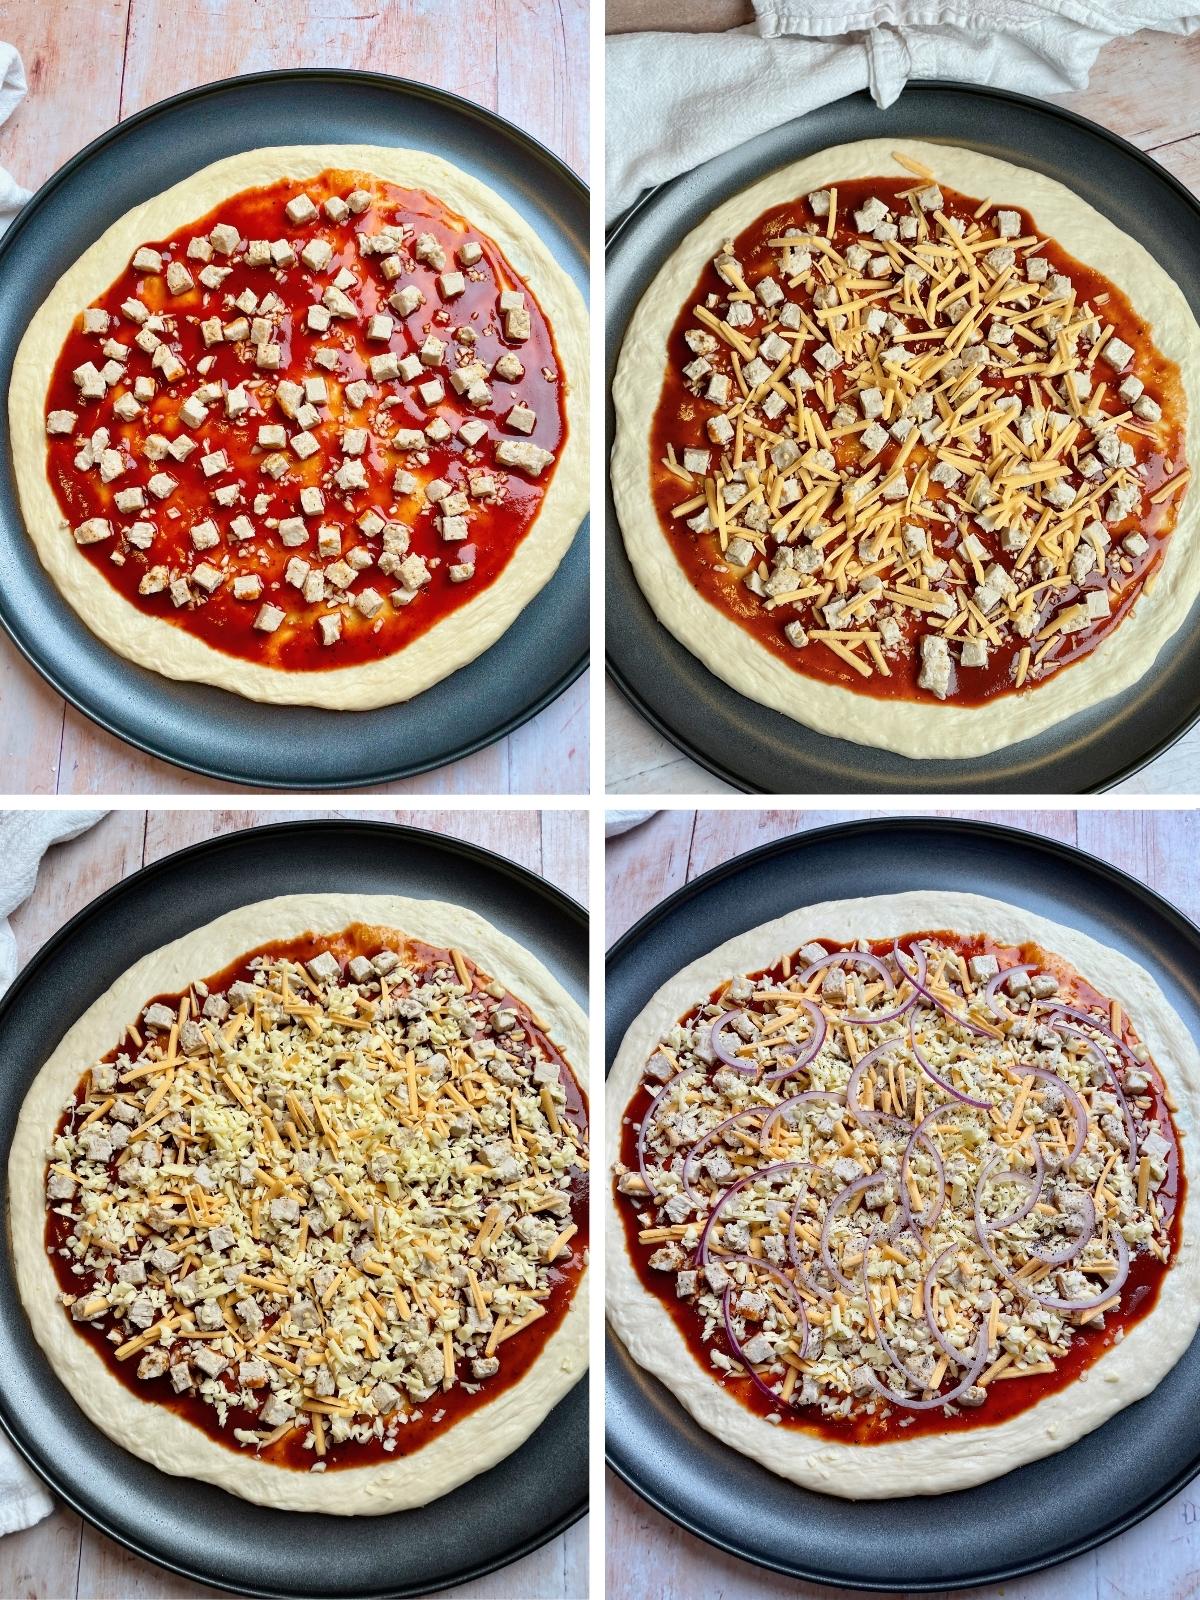 Adding toppings to bbq pizza.